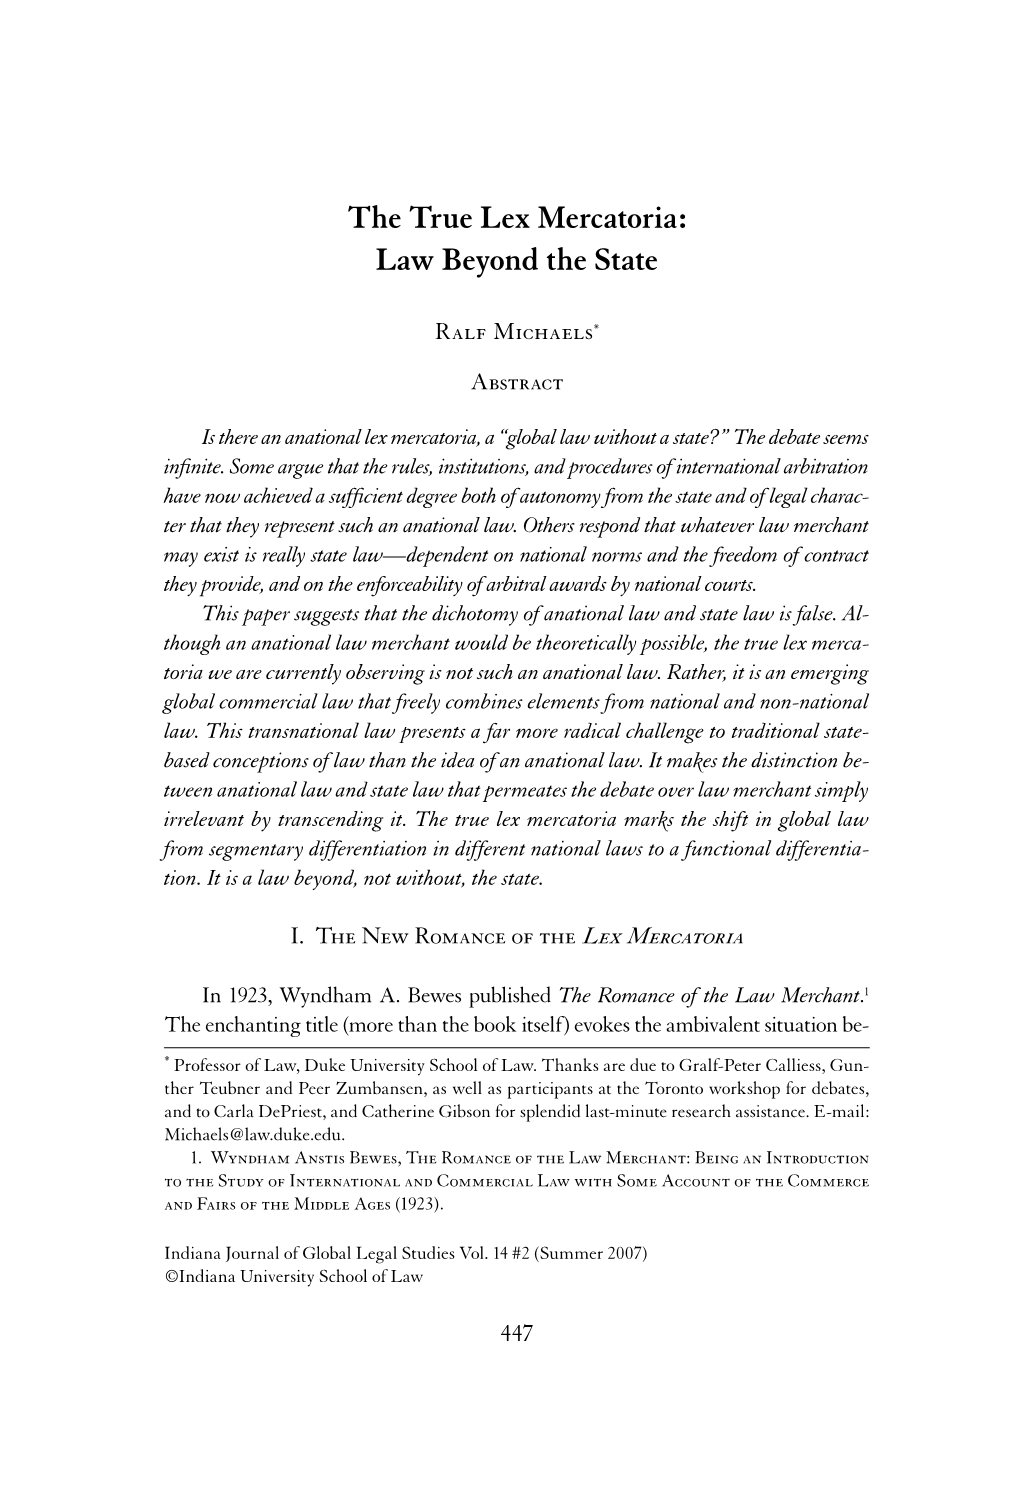 The True Lex Mercatoria: Law Beyond the State